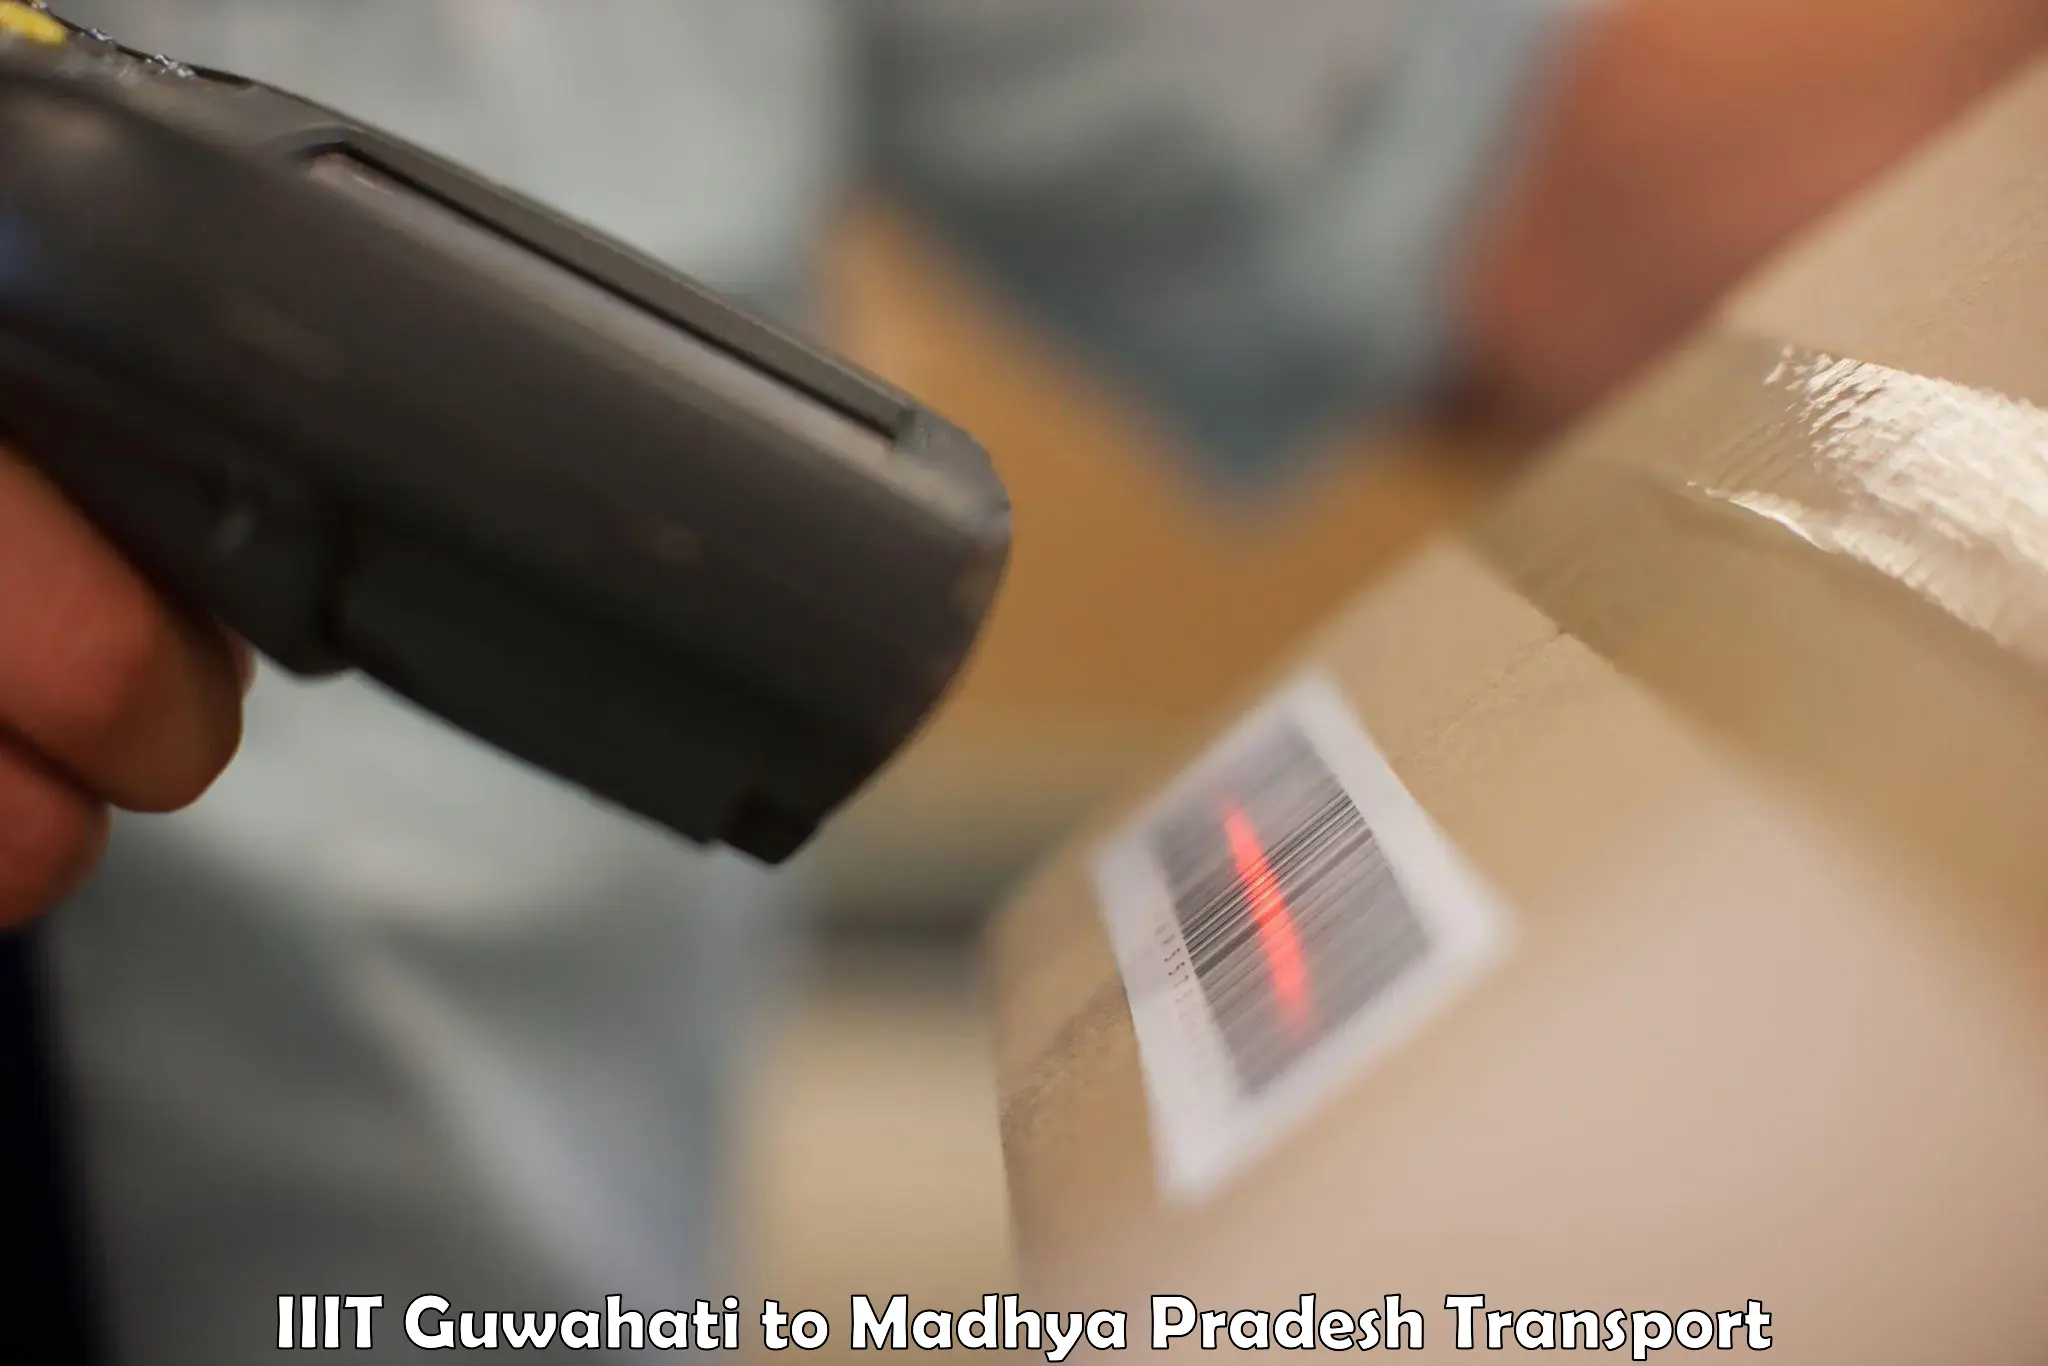 Package delivery services IIIT Guwahati to Alirajpur